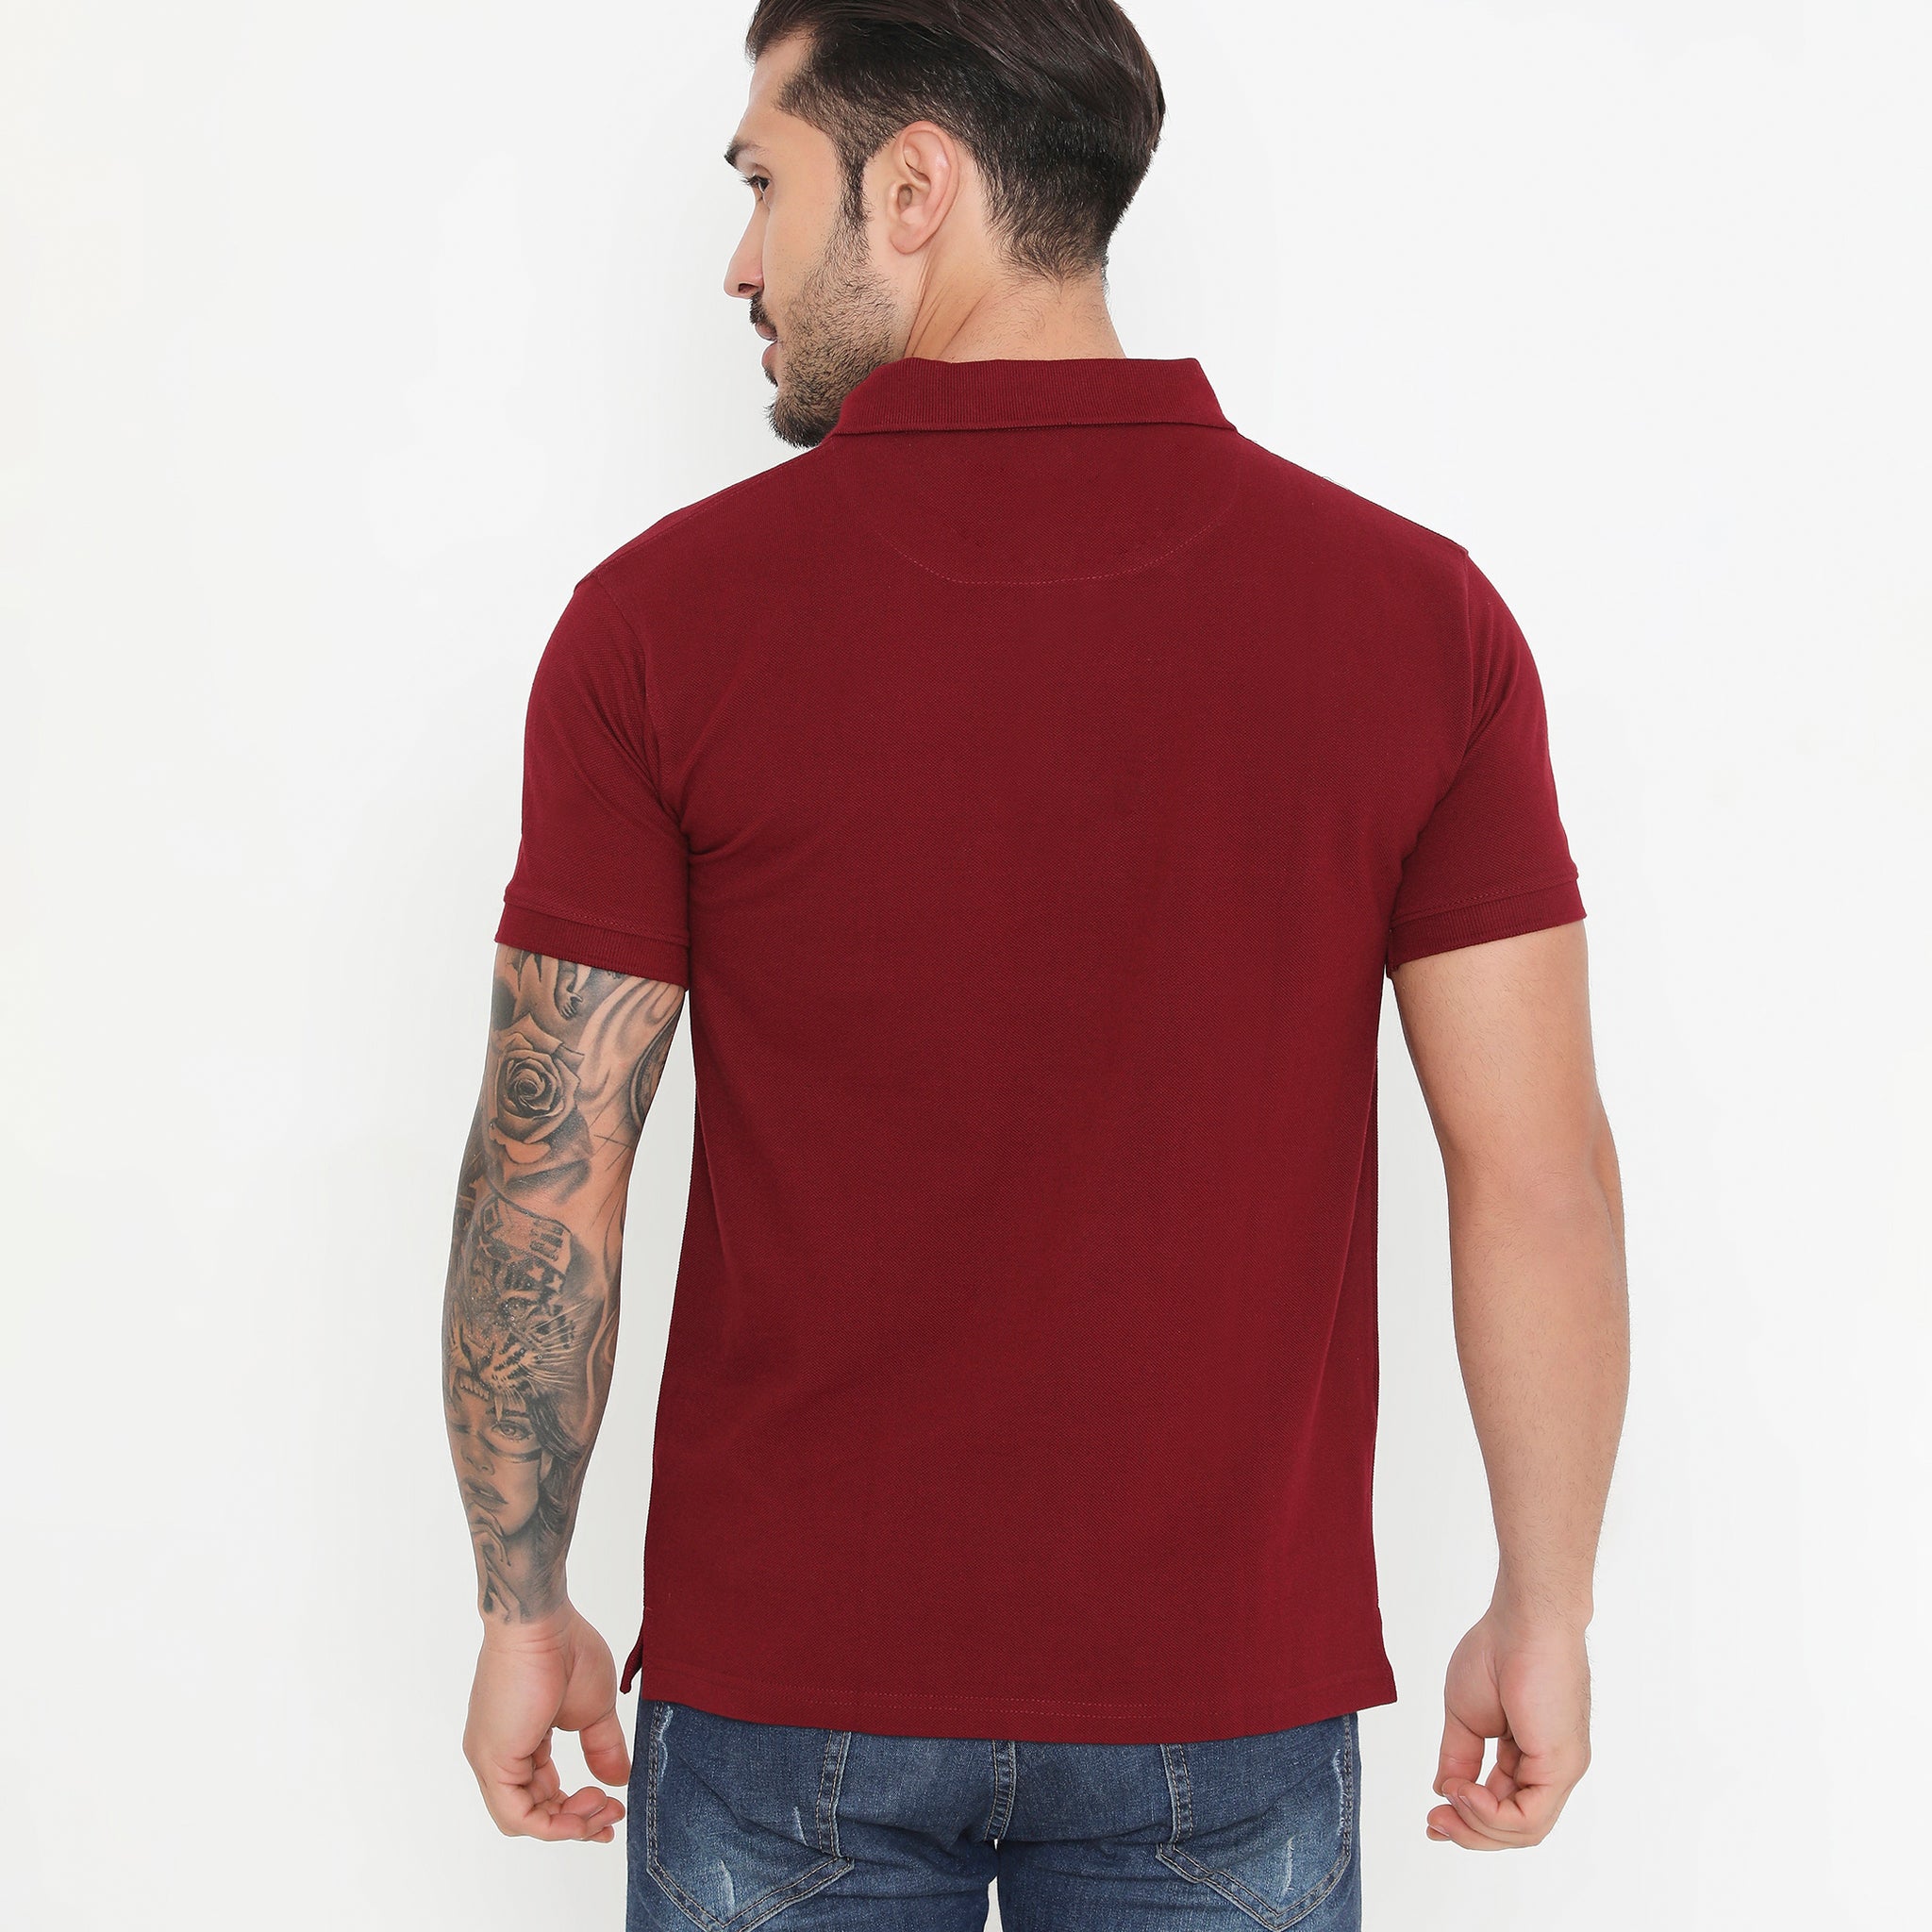 Men Wine Essential Cotton Polo T-Shirt with Chest Pocket